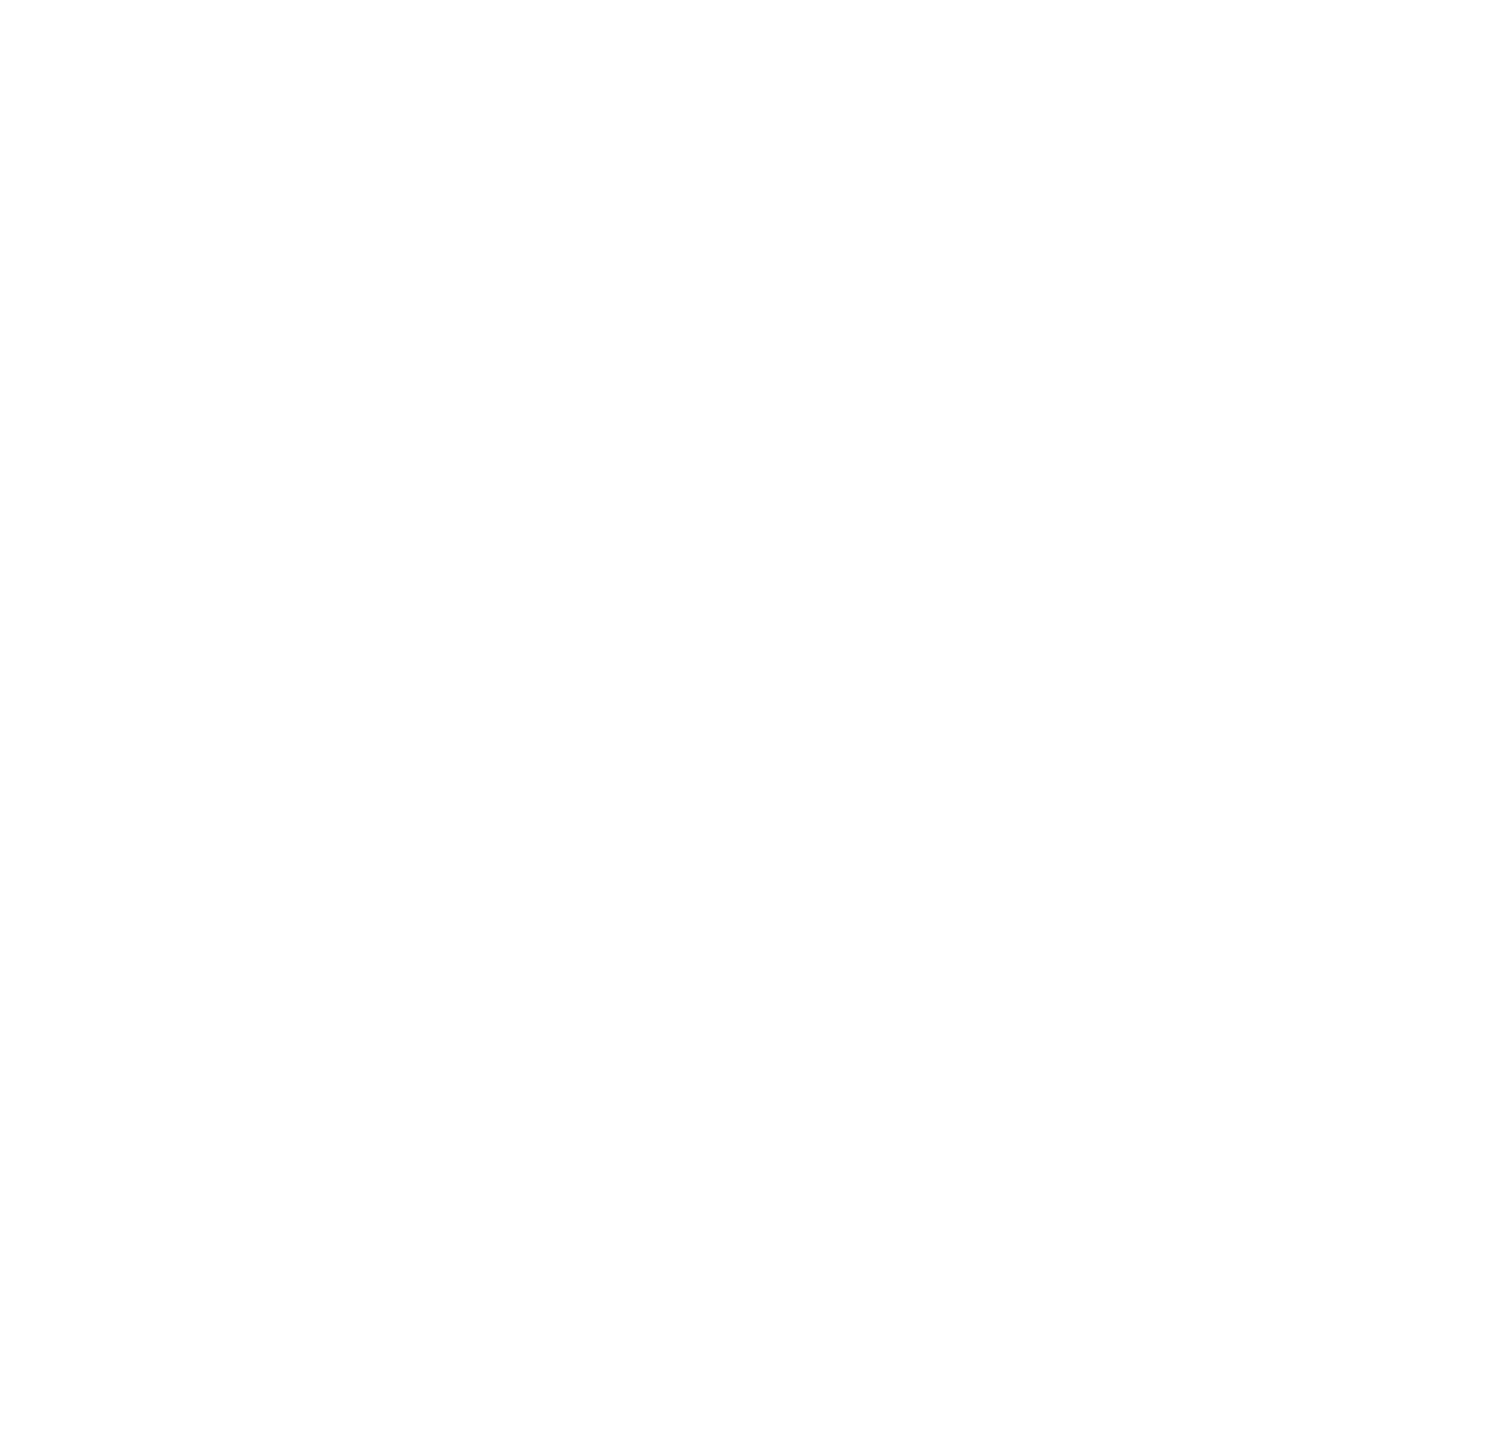 THE RUSH COLLECTIVE